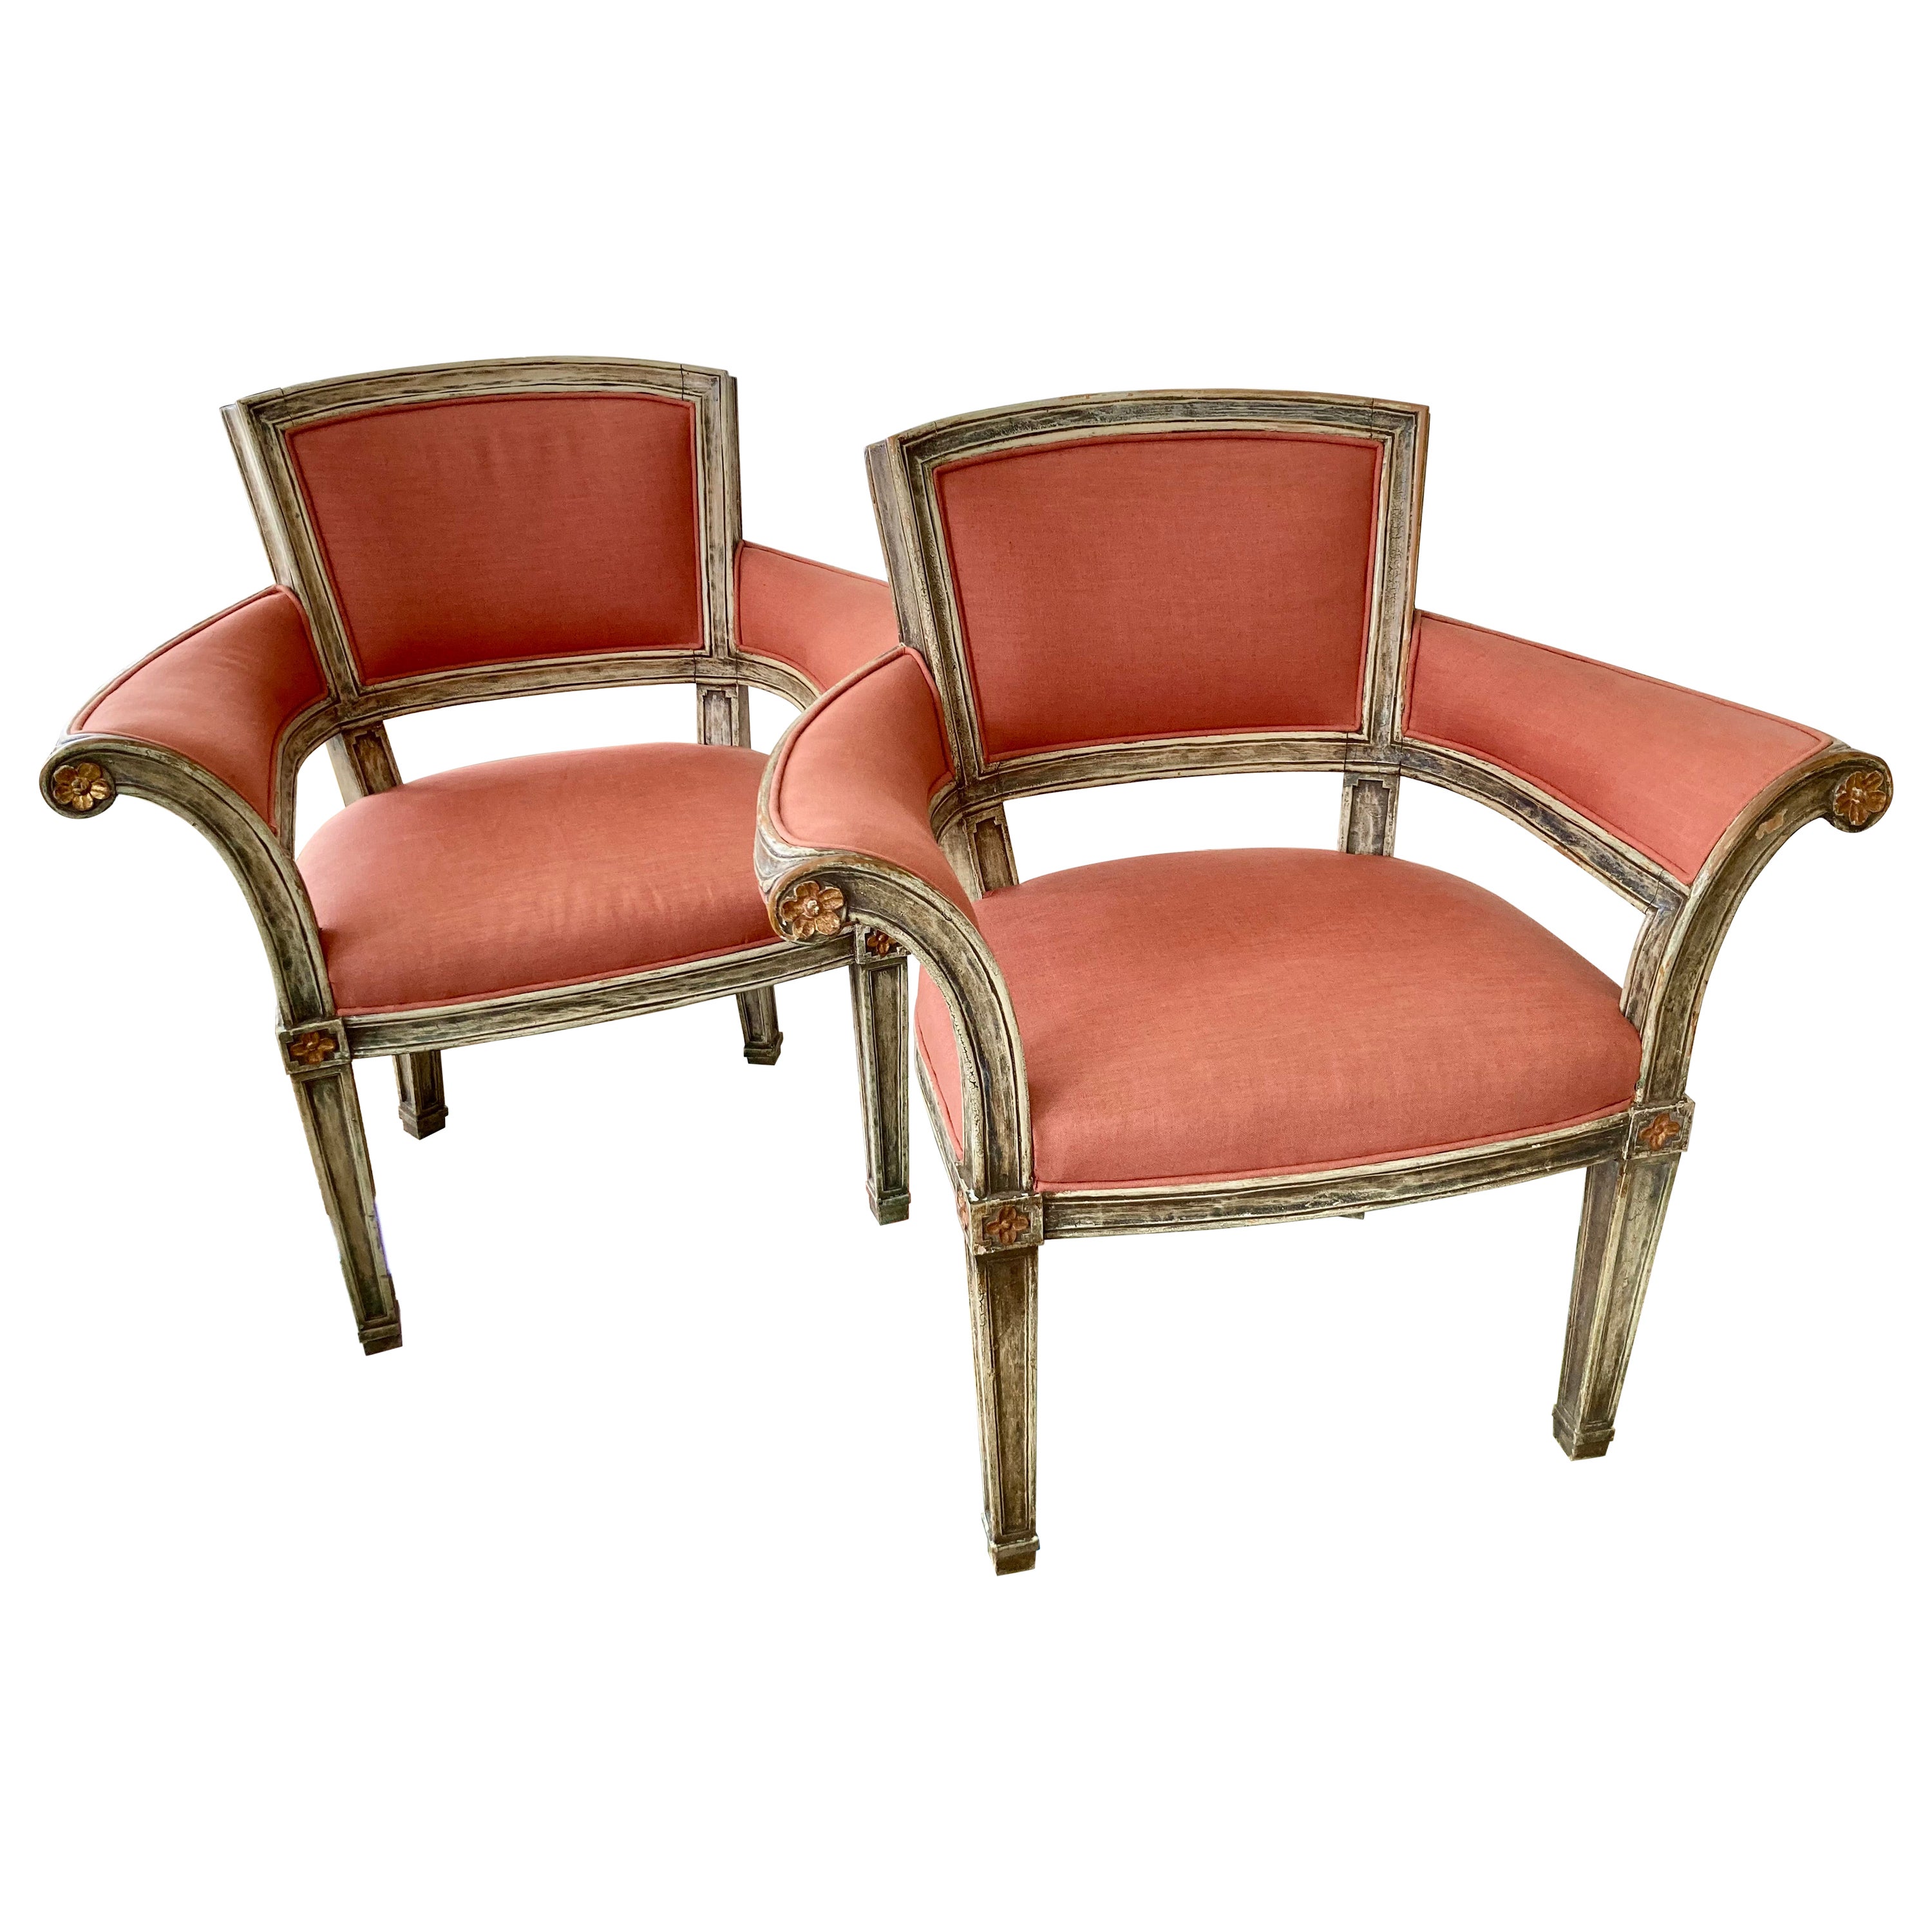 French Style Transitional Fauteuils With Linen Upholstery, a Pair For Sale